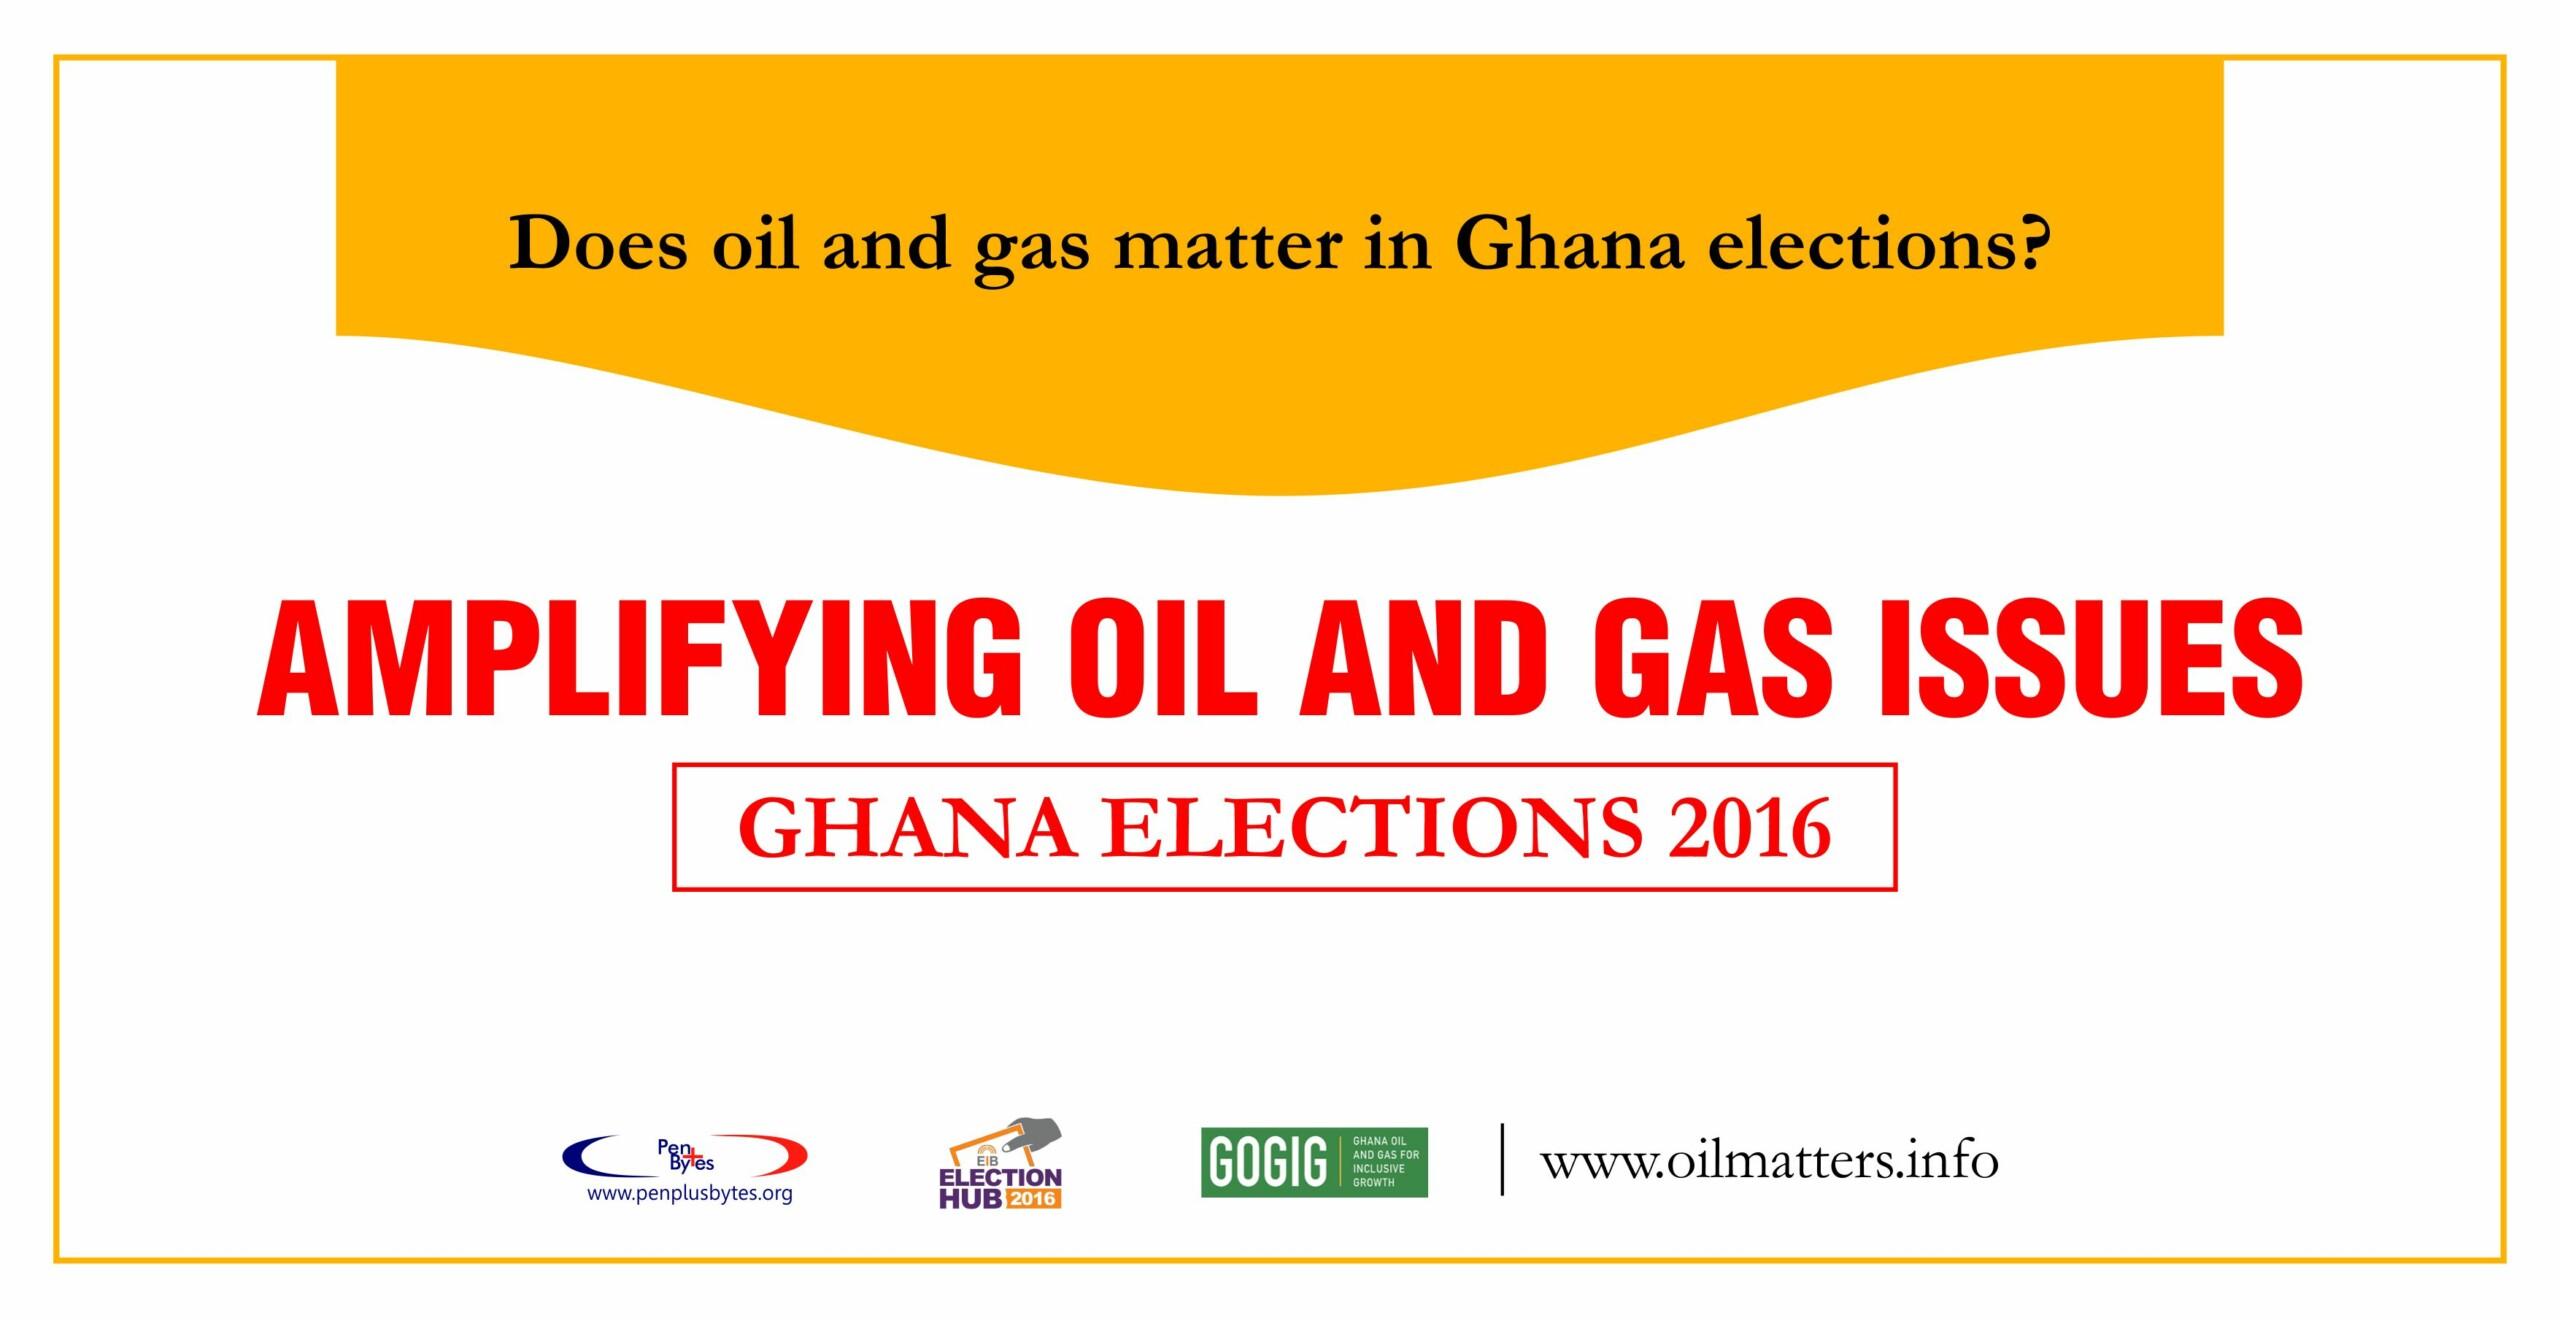 Does Oil and Gas matter in Ghana Elections 2016?